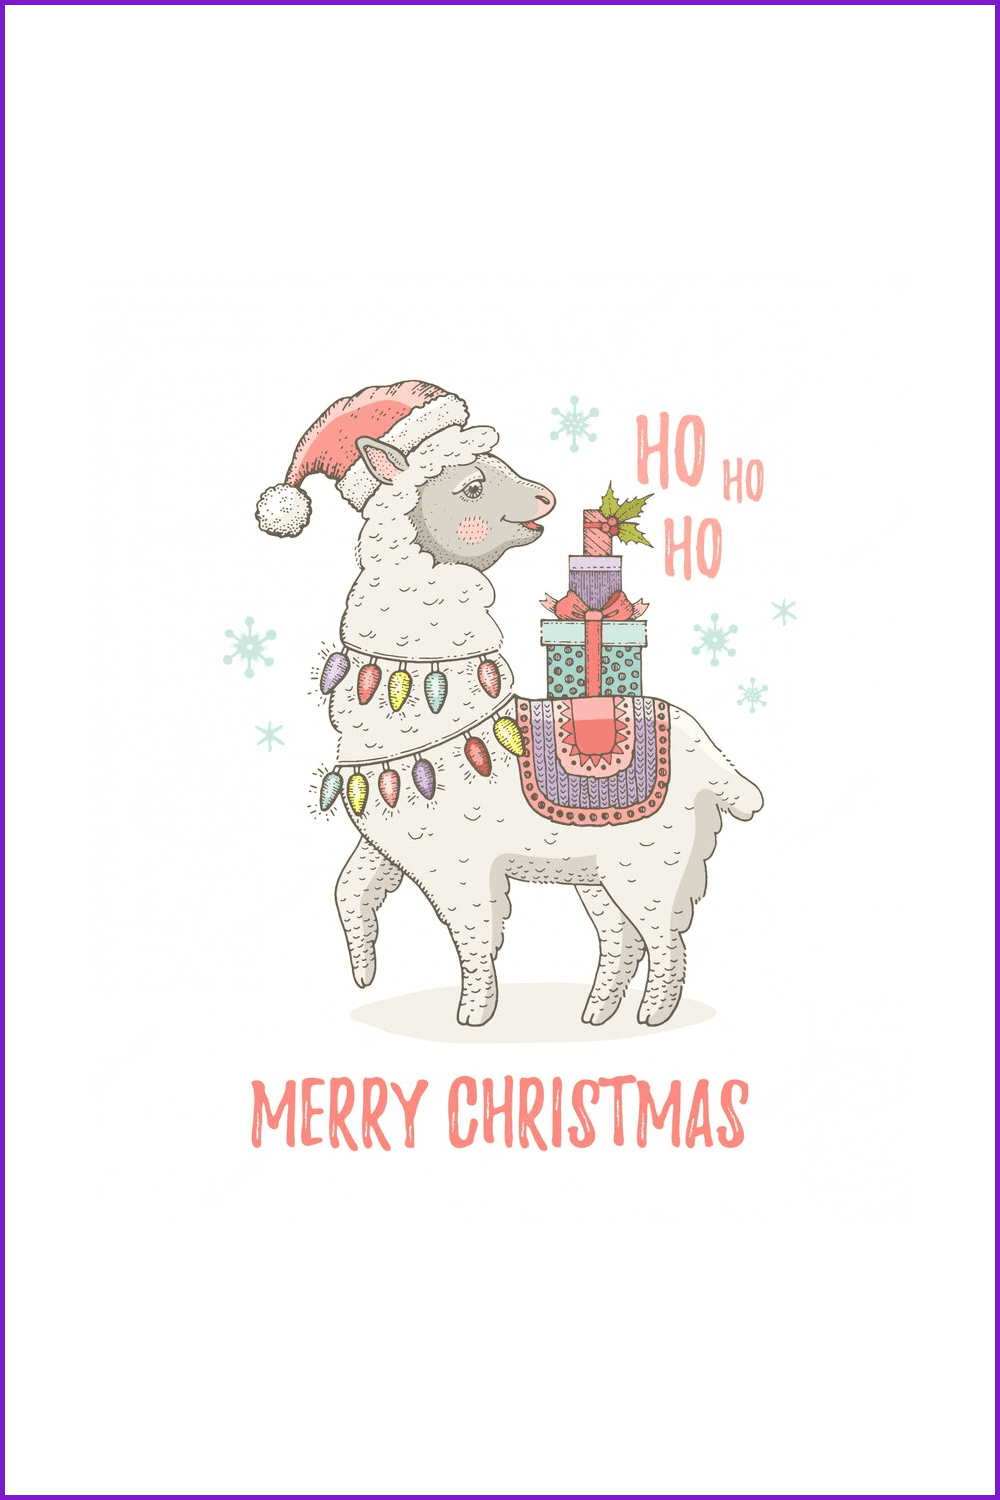 Cute alpaca with presents, a red hat, and lights.